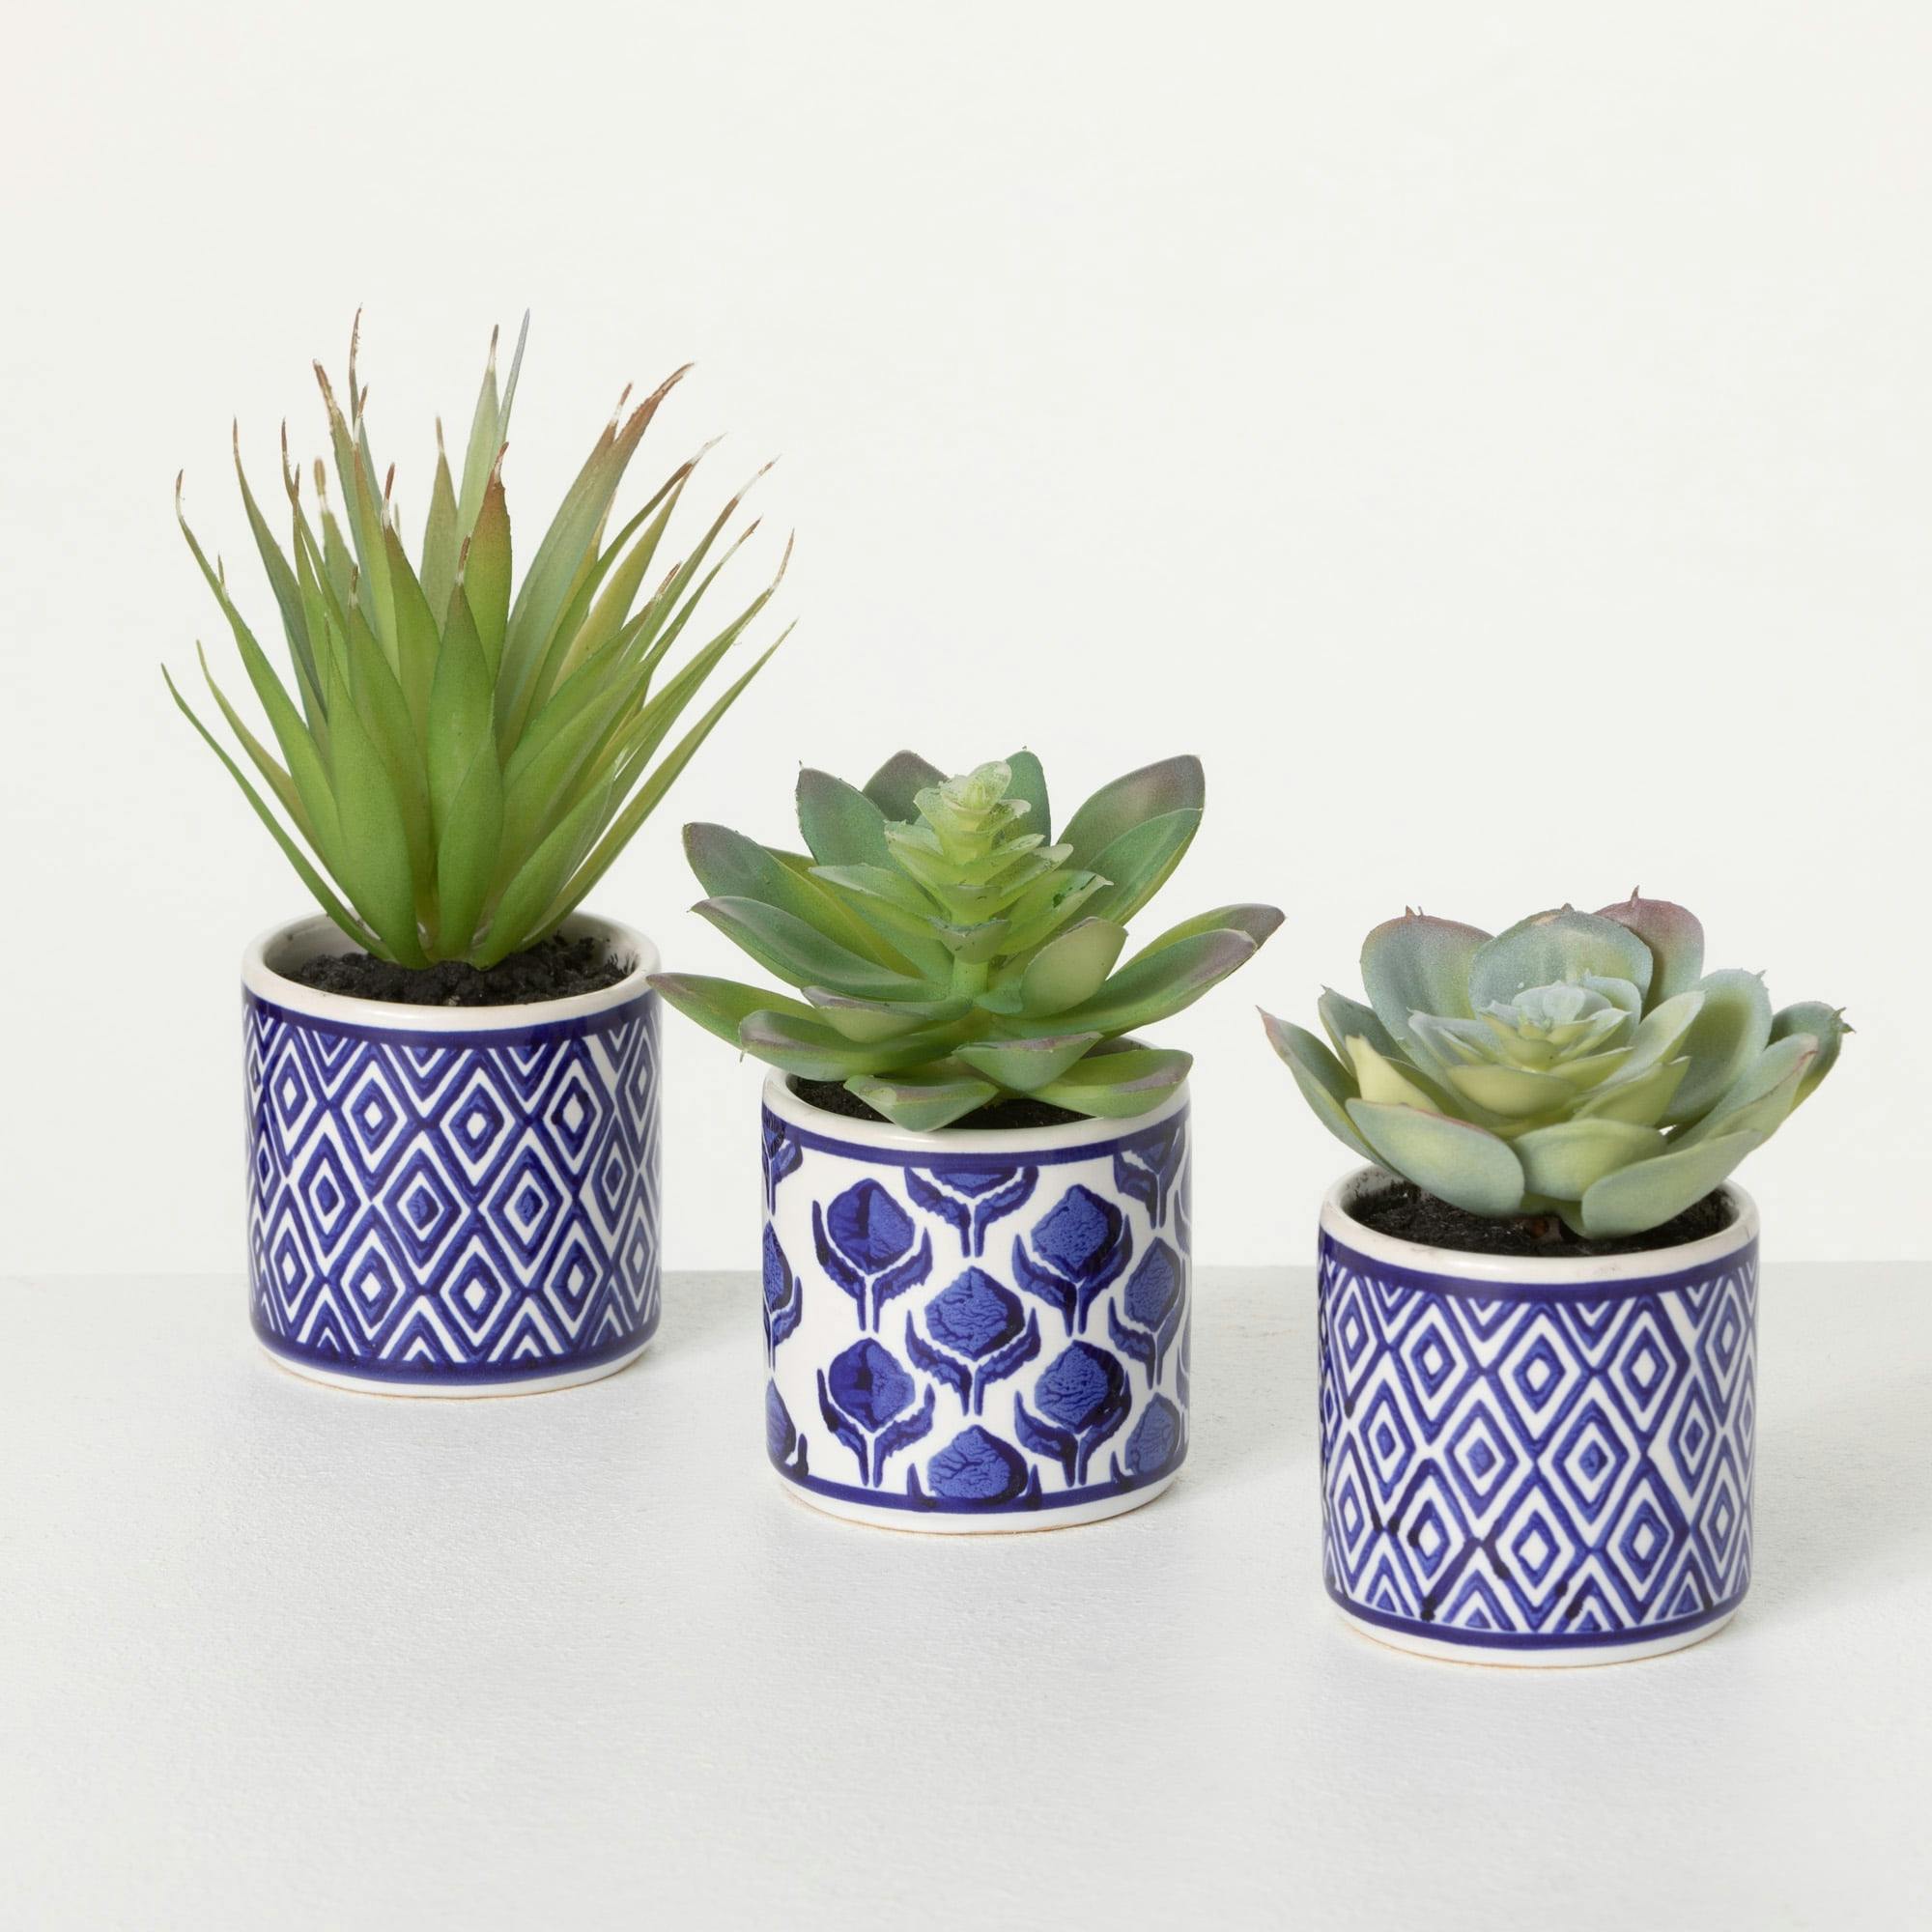 Spring Essence Trio of Artful Succulents in Patterned Pots